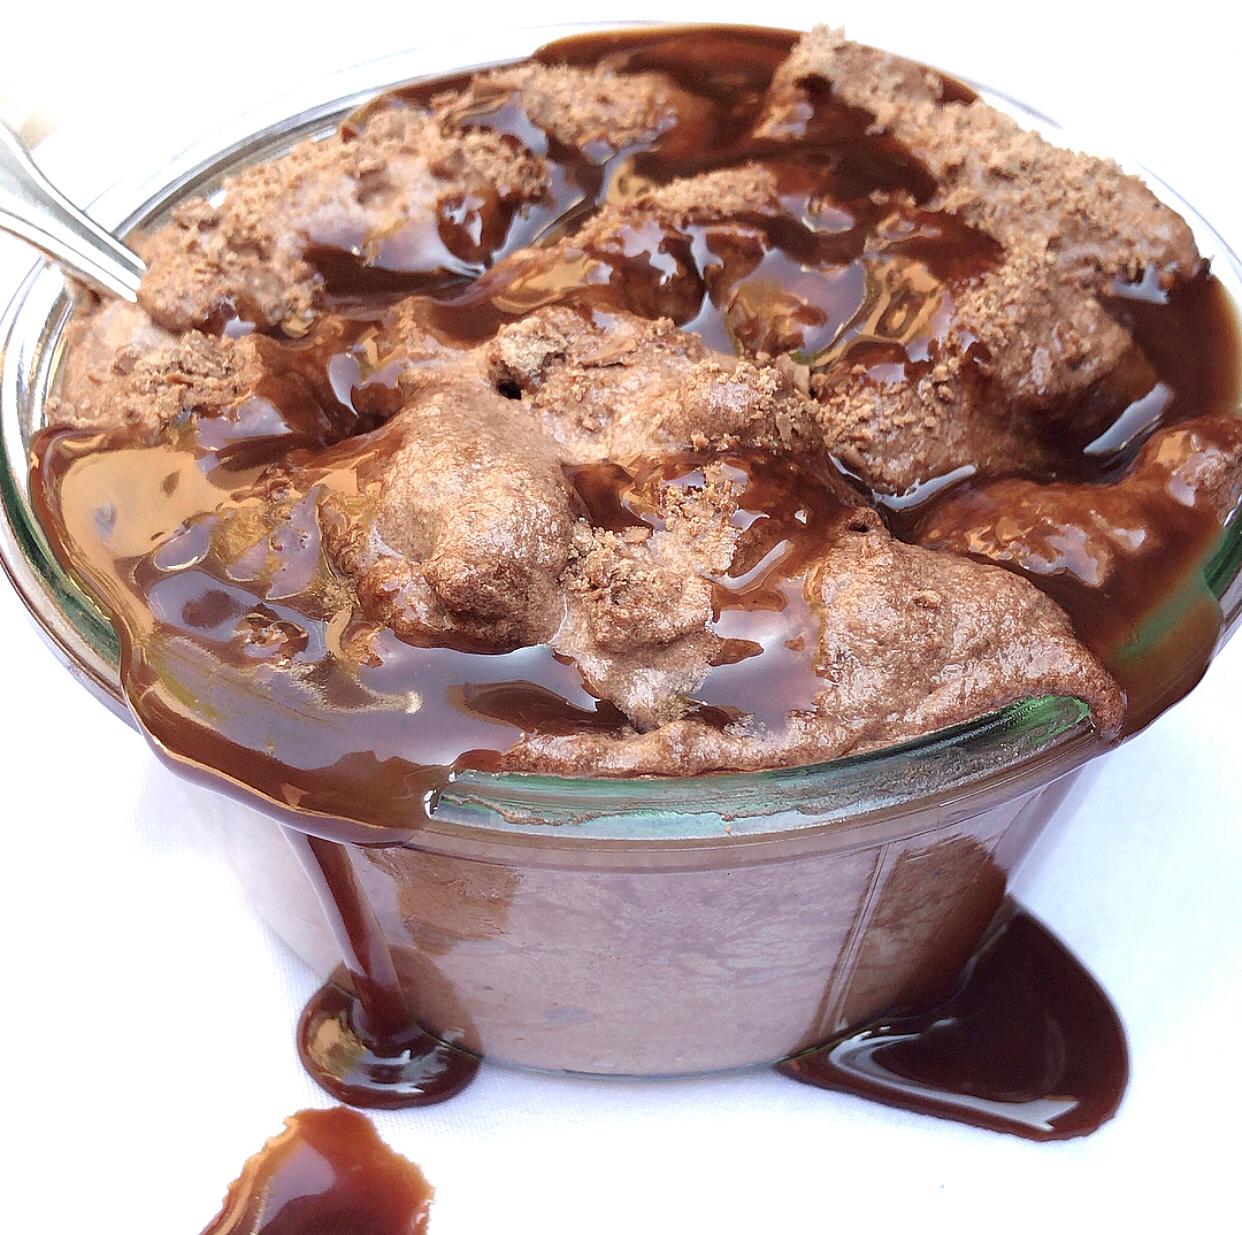 Protein Chocolate Mousse